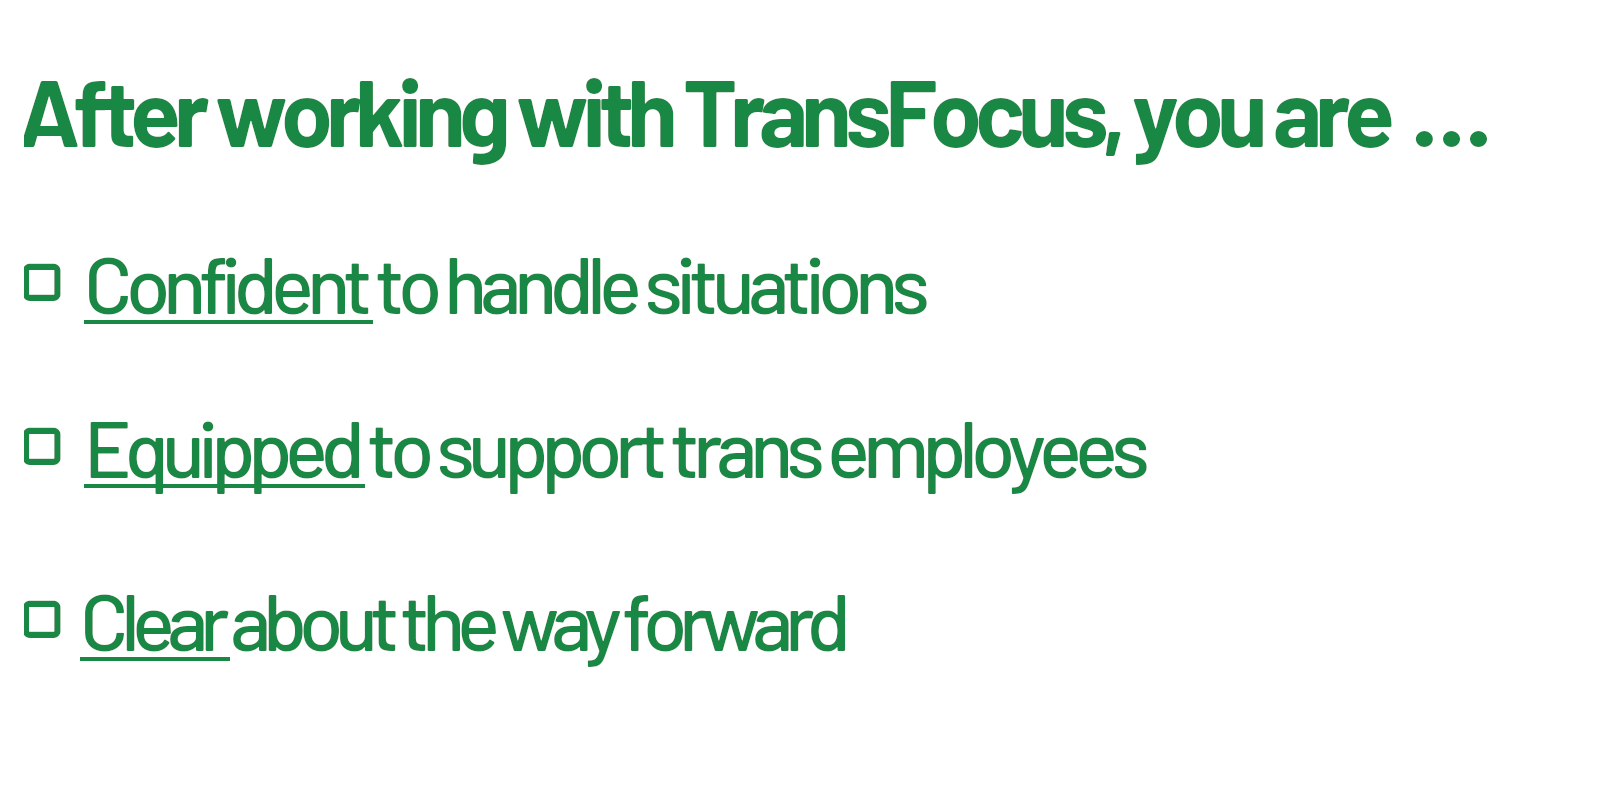 After working with Transfocus, you are...